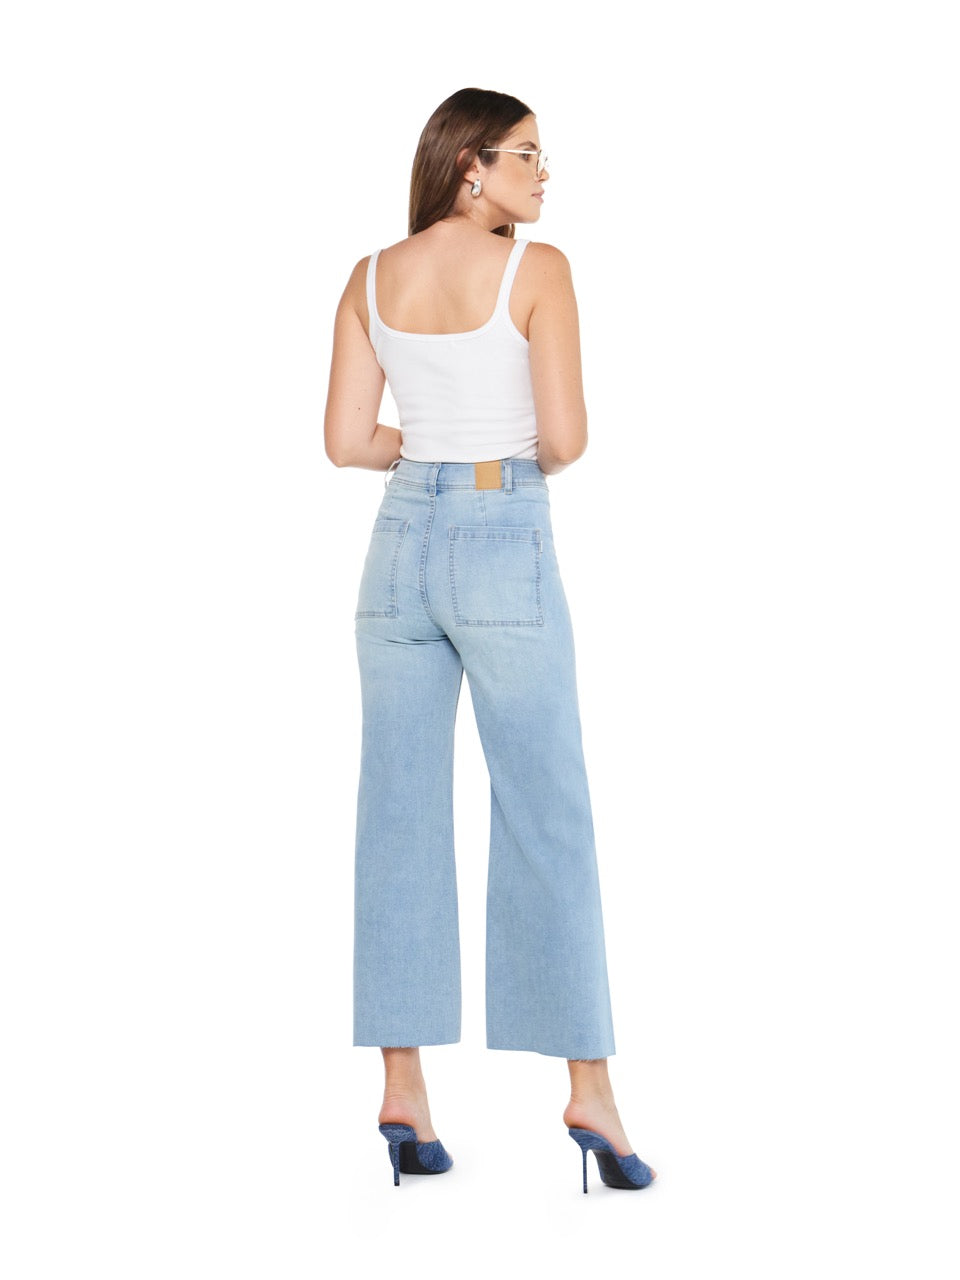 articles of society carine high rise wide leg jeans in light mist-back view